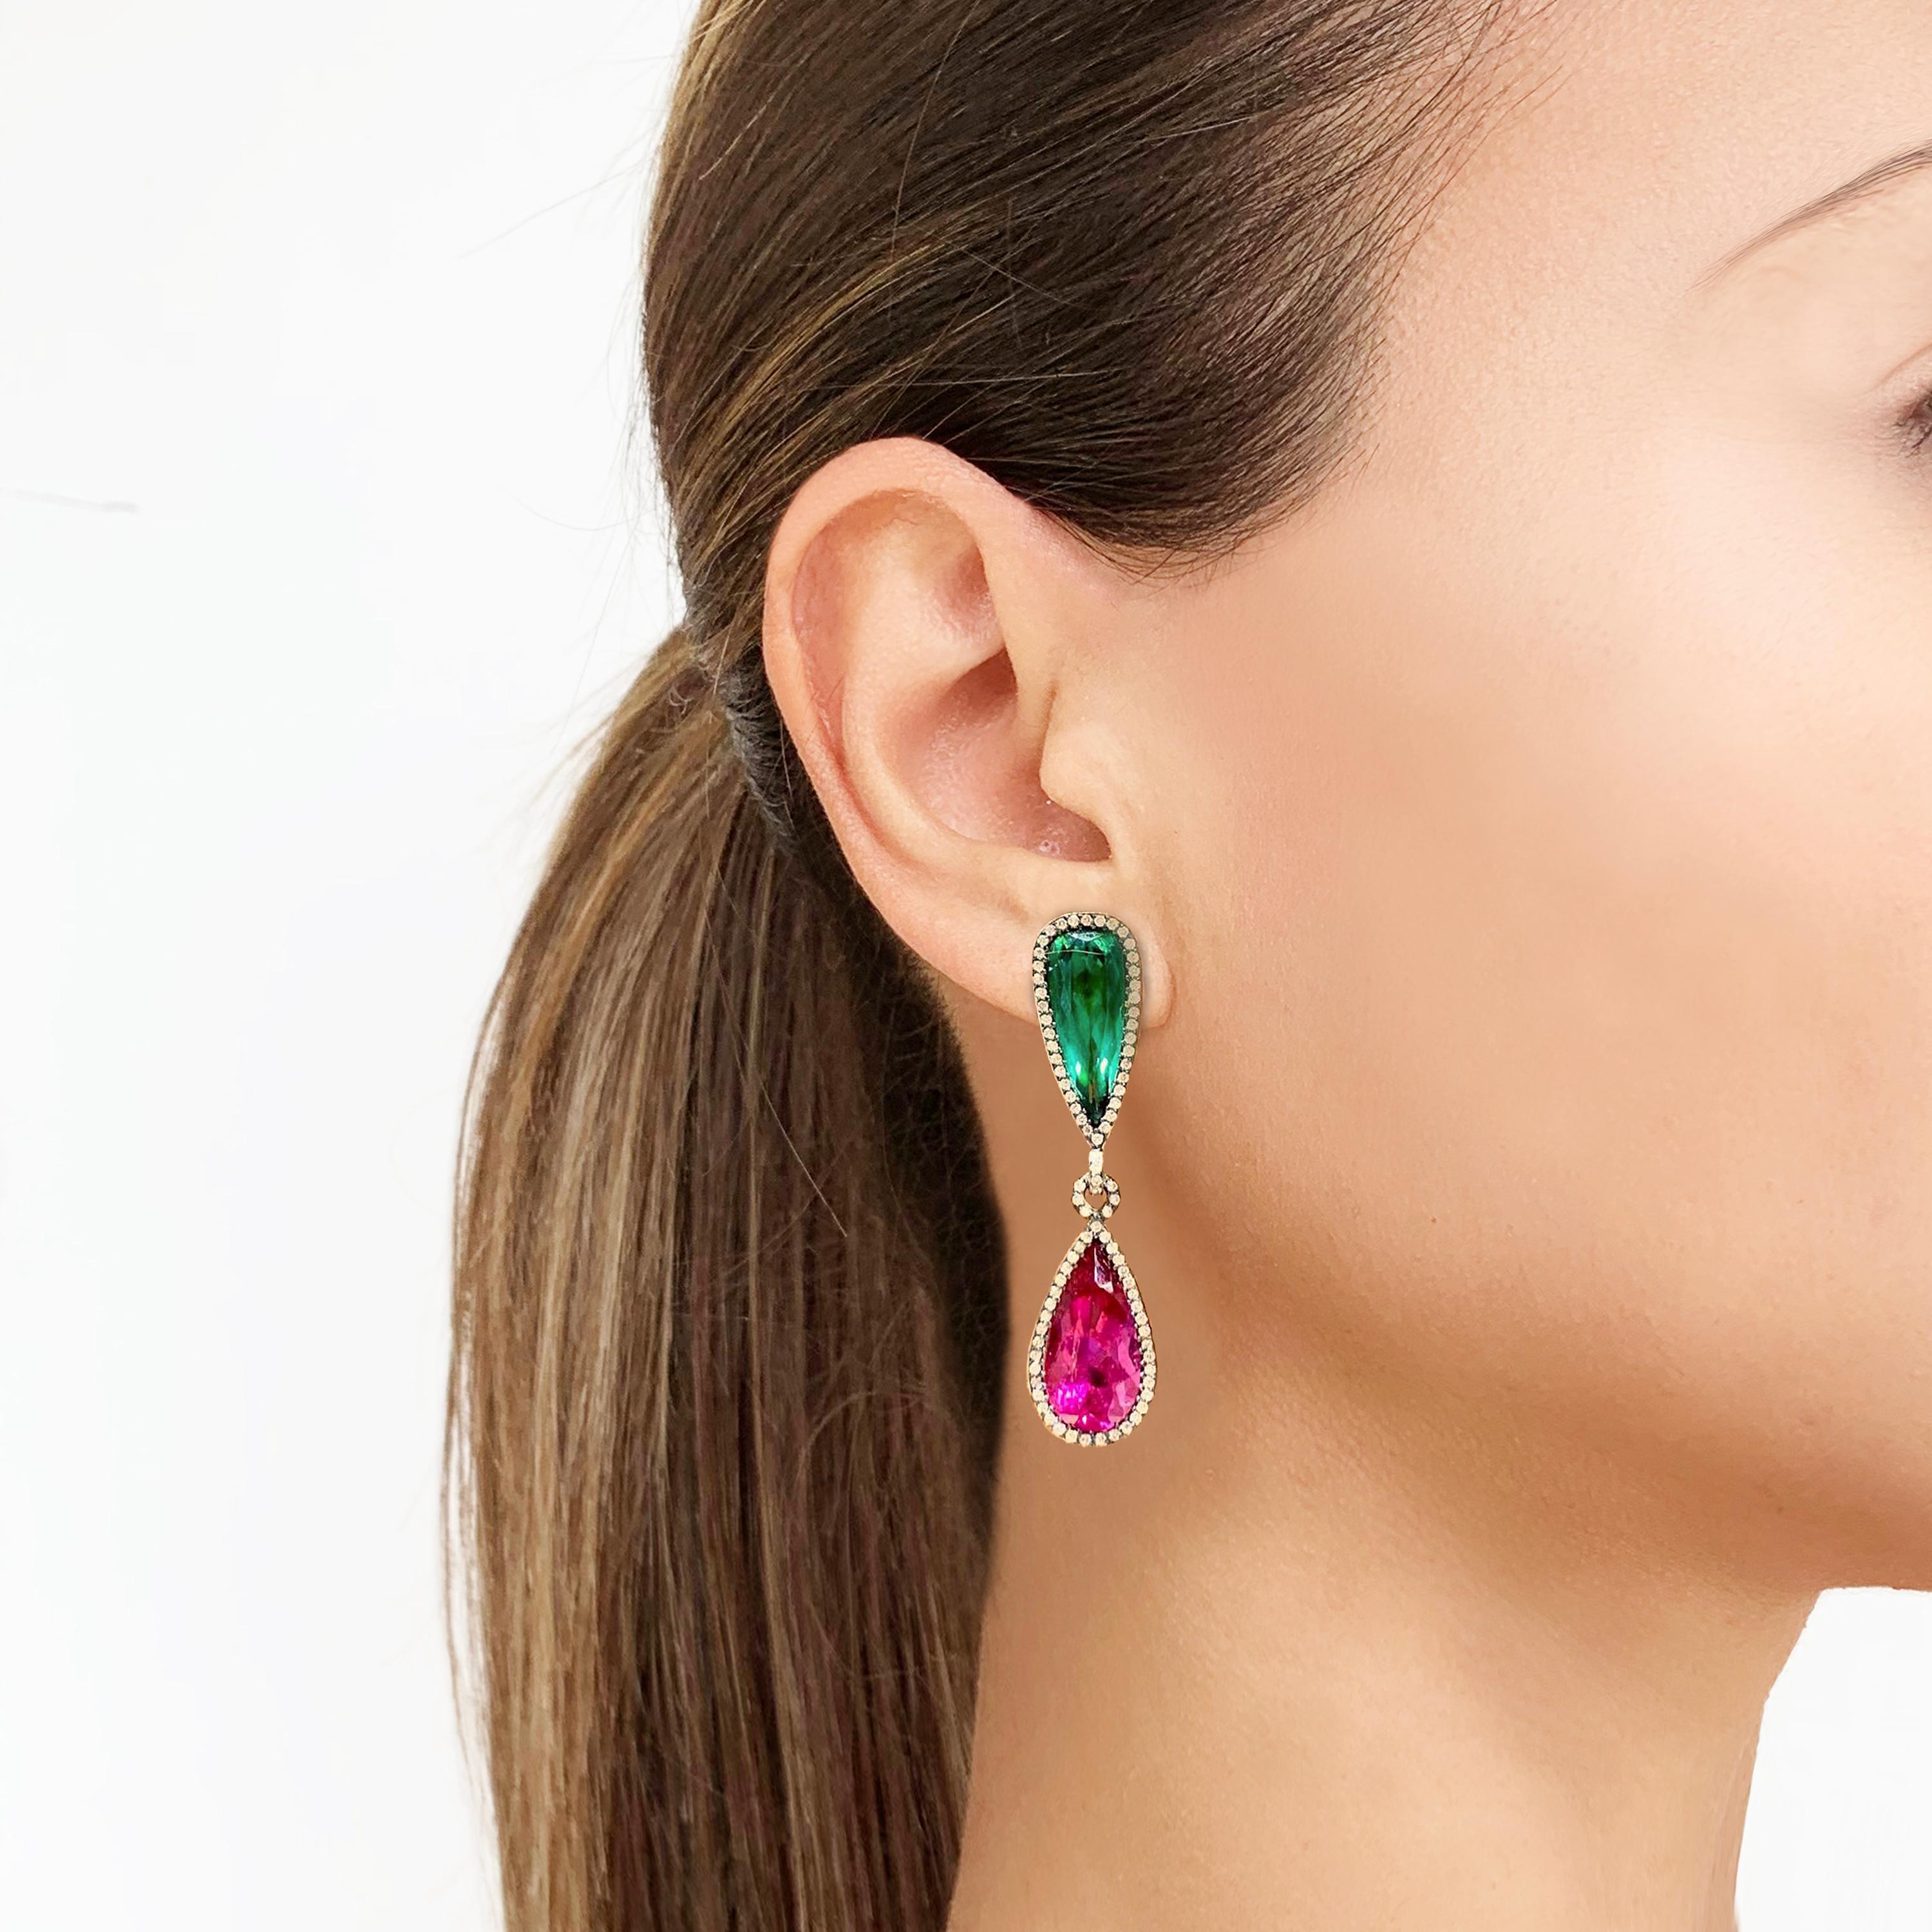 Rosior by Manuel Rosas Contemporary Dangle Earrings Manufactured in 19.2 Karat Gold featuring 4 Pear Cut Tourmalines from Mozambique:
- 2 Pink Tourmalines with 11,34 ct,
- 2 green Tourmalines with 7,76 ct,
and:
- 194 